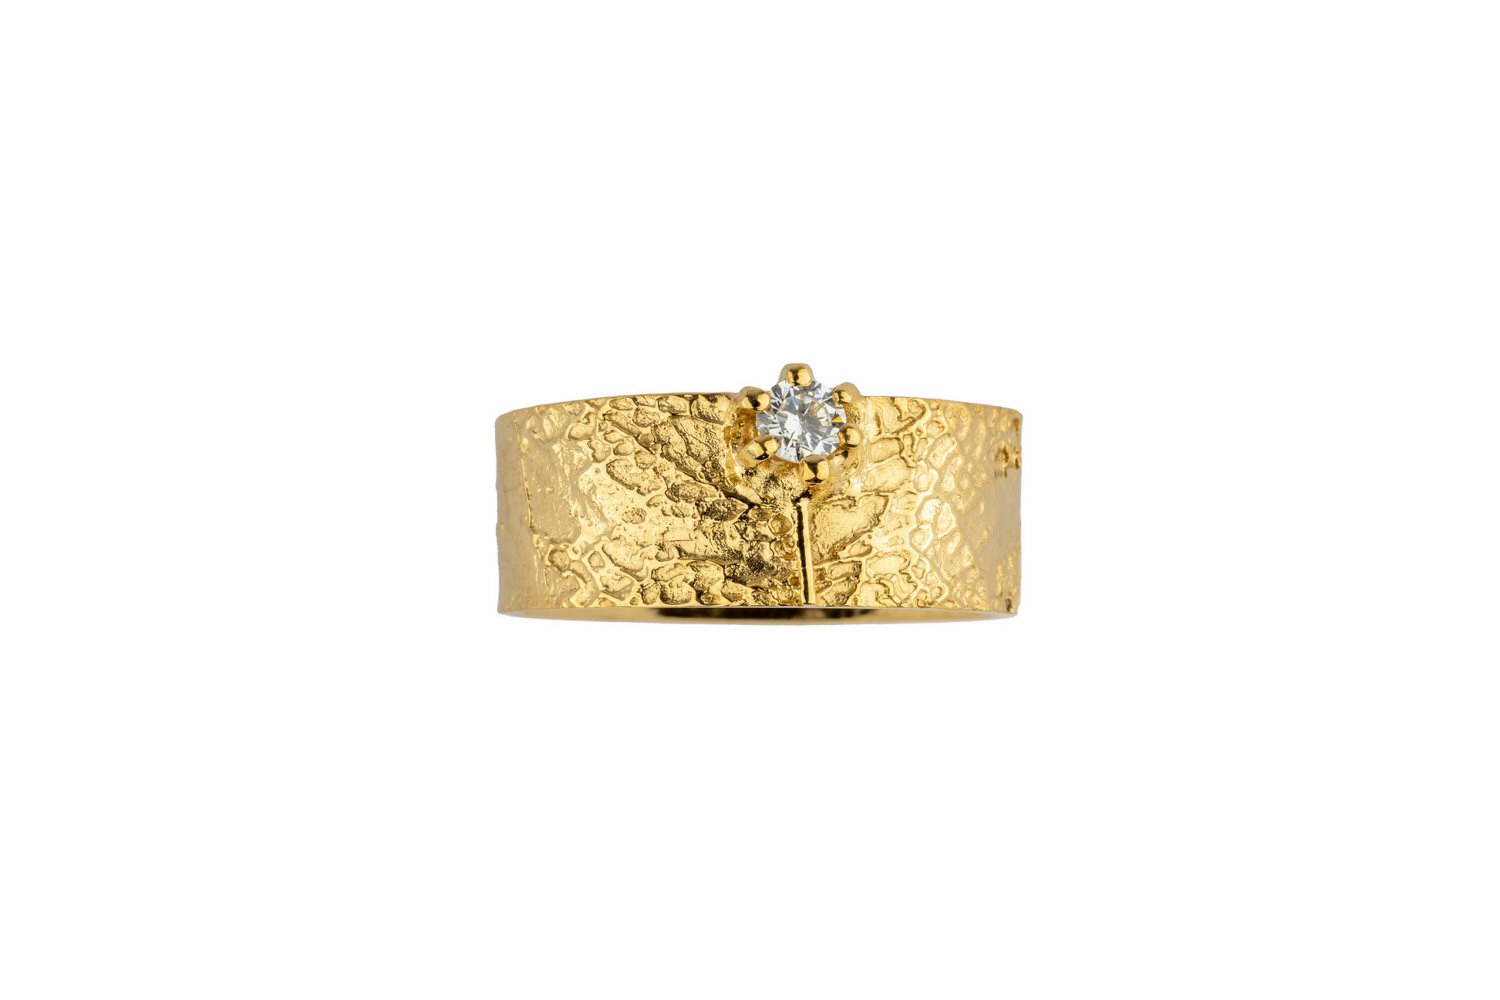 18ct Gold Wide Leaf Textured Ring with Diamond